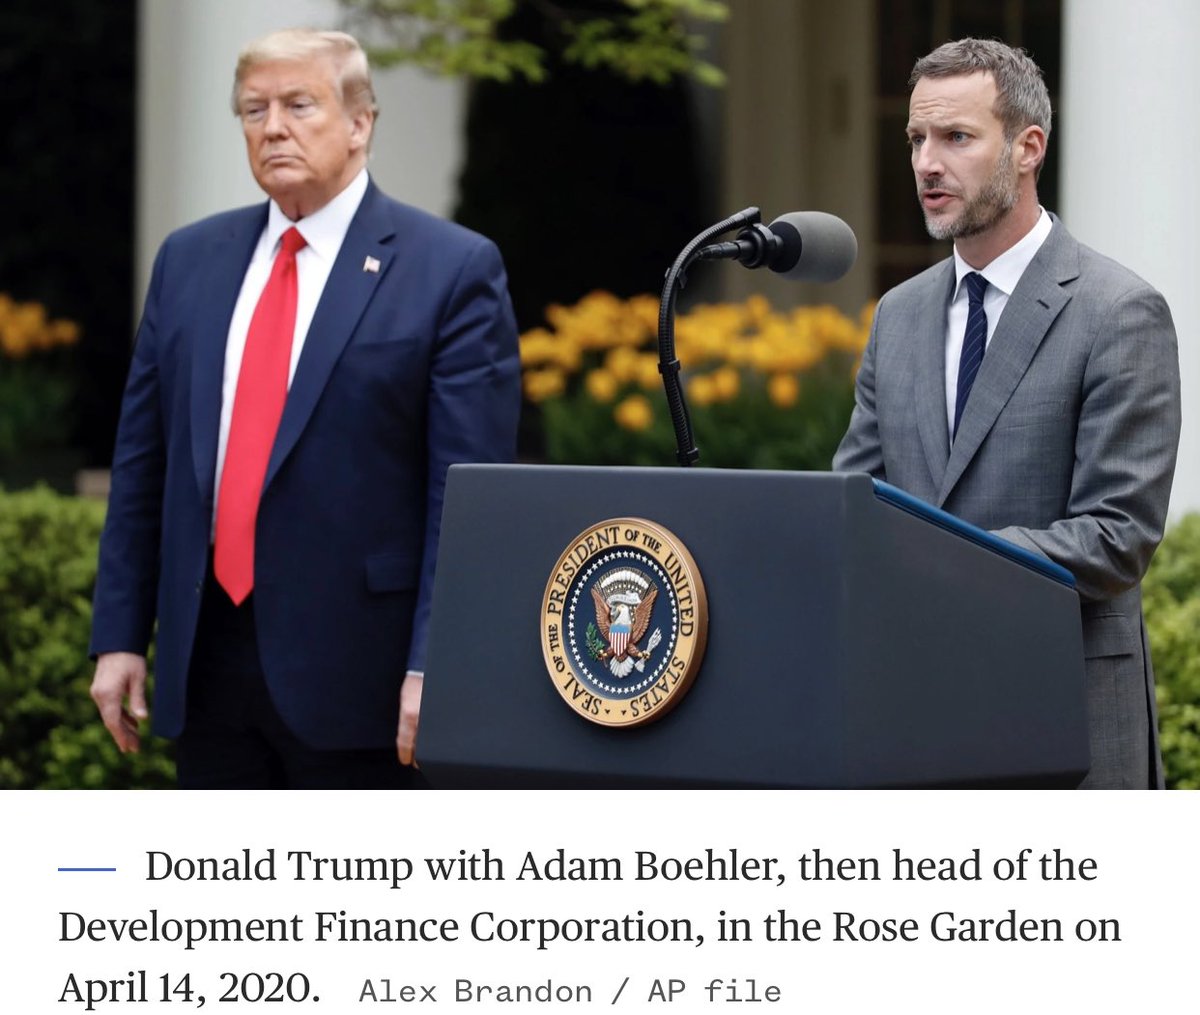 Jared Kushner‘s college roommate was awarded $100 million by Donald Trump to procure PPE during Covid. Adam Boehler only spent $1 Million as our doctors wore garbage bags and fought over ventilators. Who else demands an investigation as public as Hunter Biden’s?🤚🤚🤚